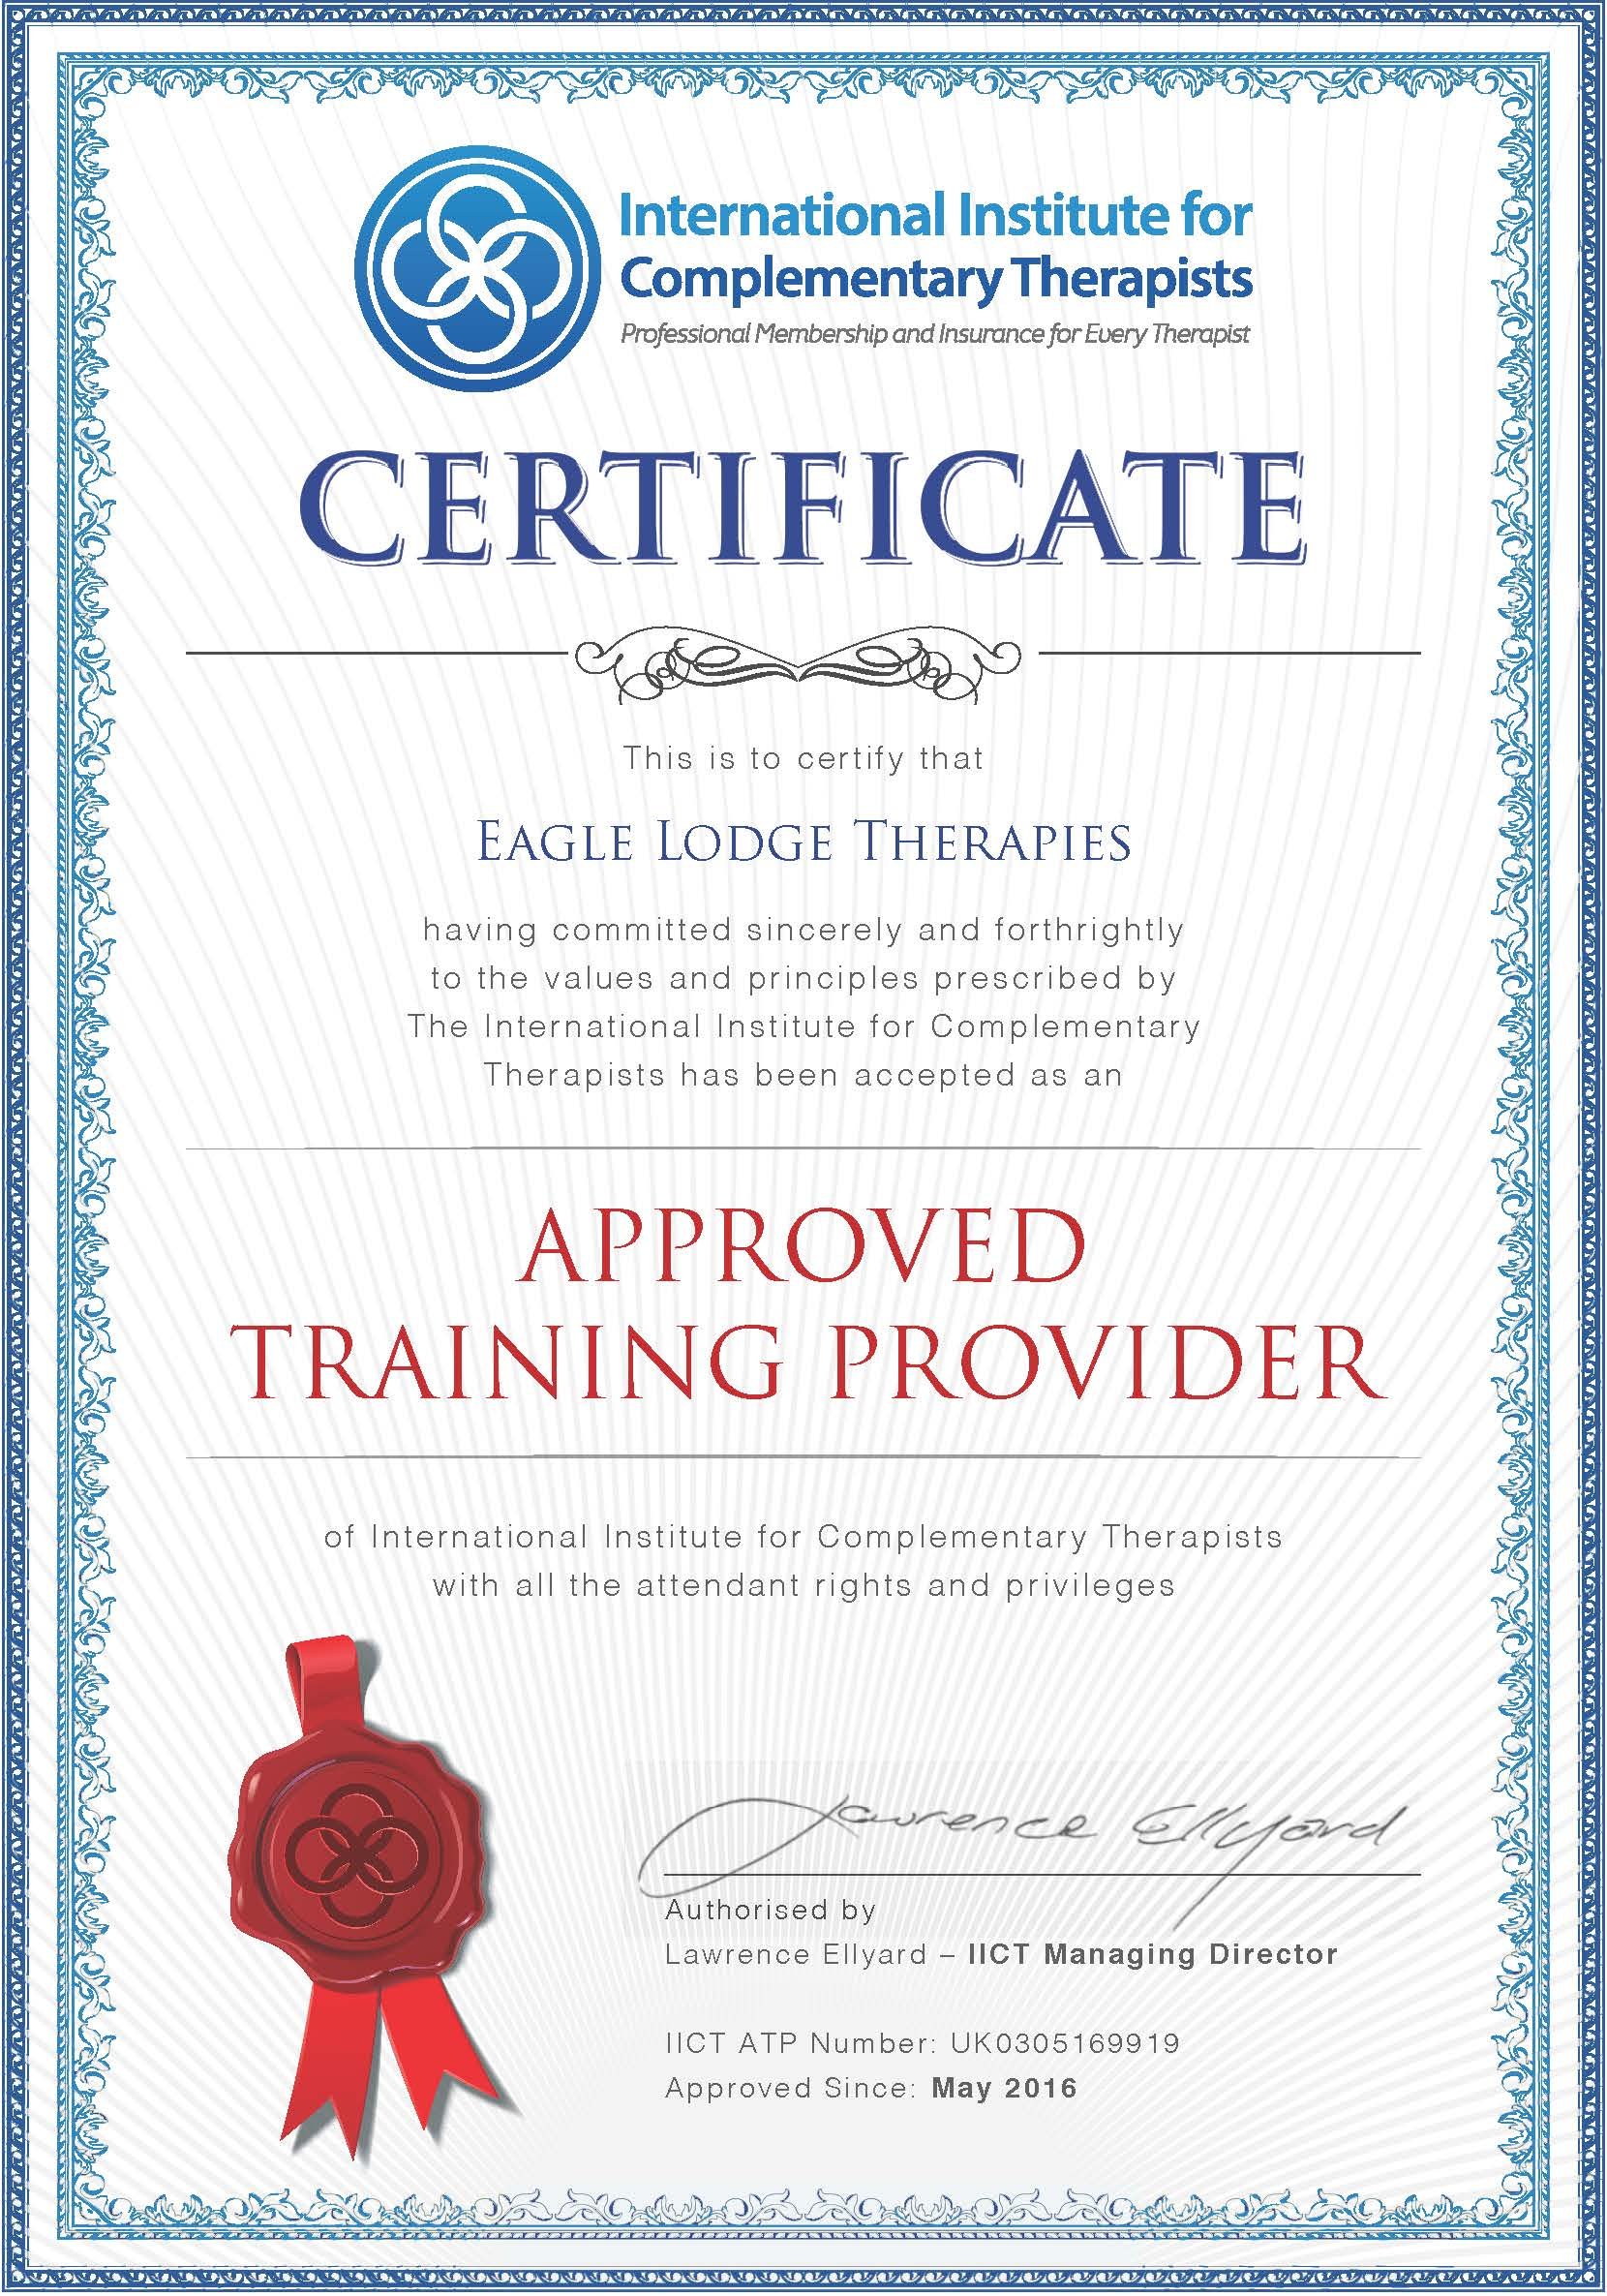 iict certificate approved training provider